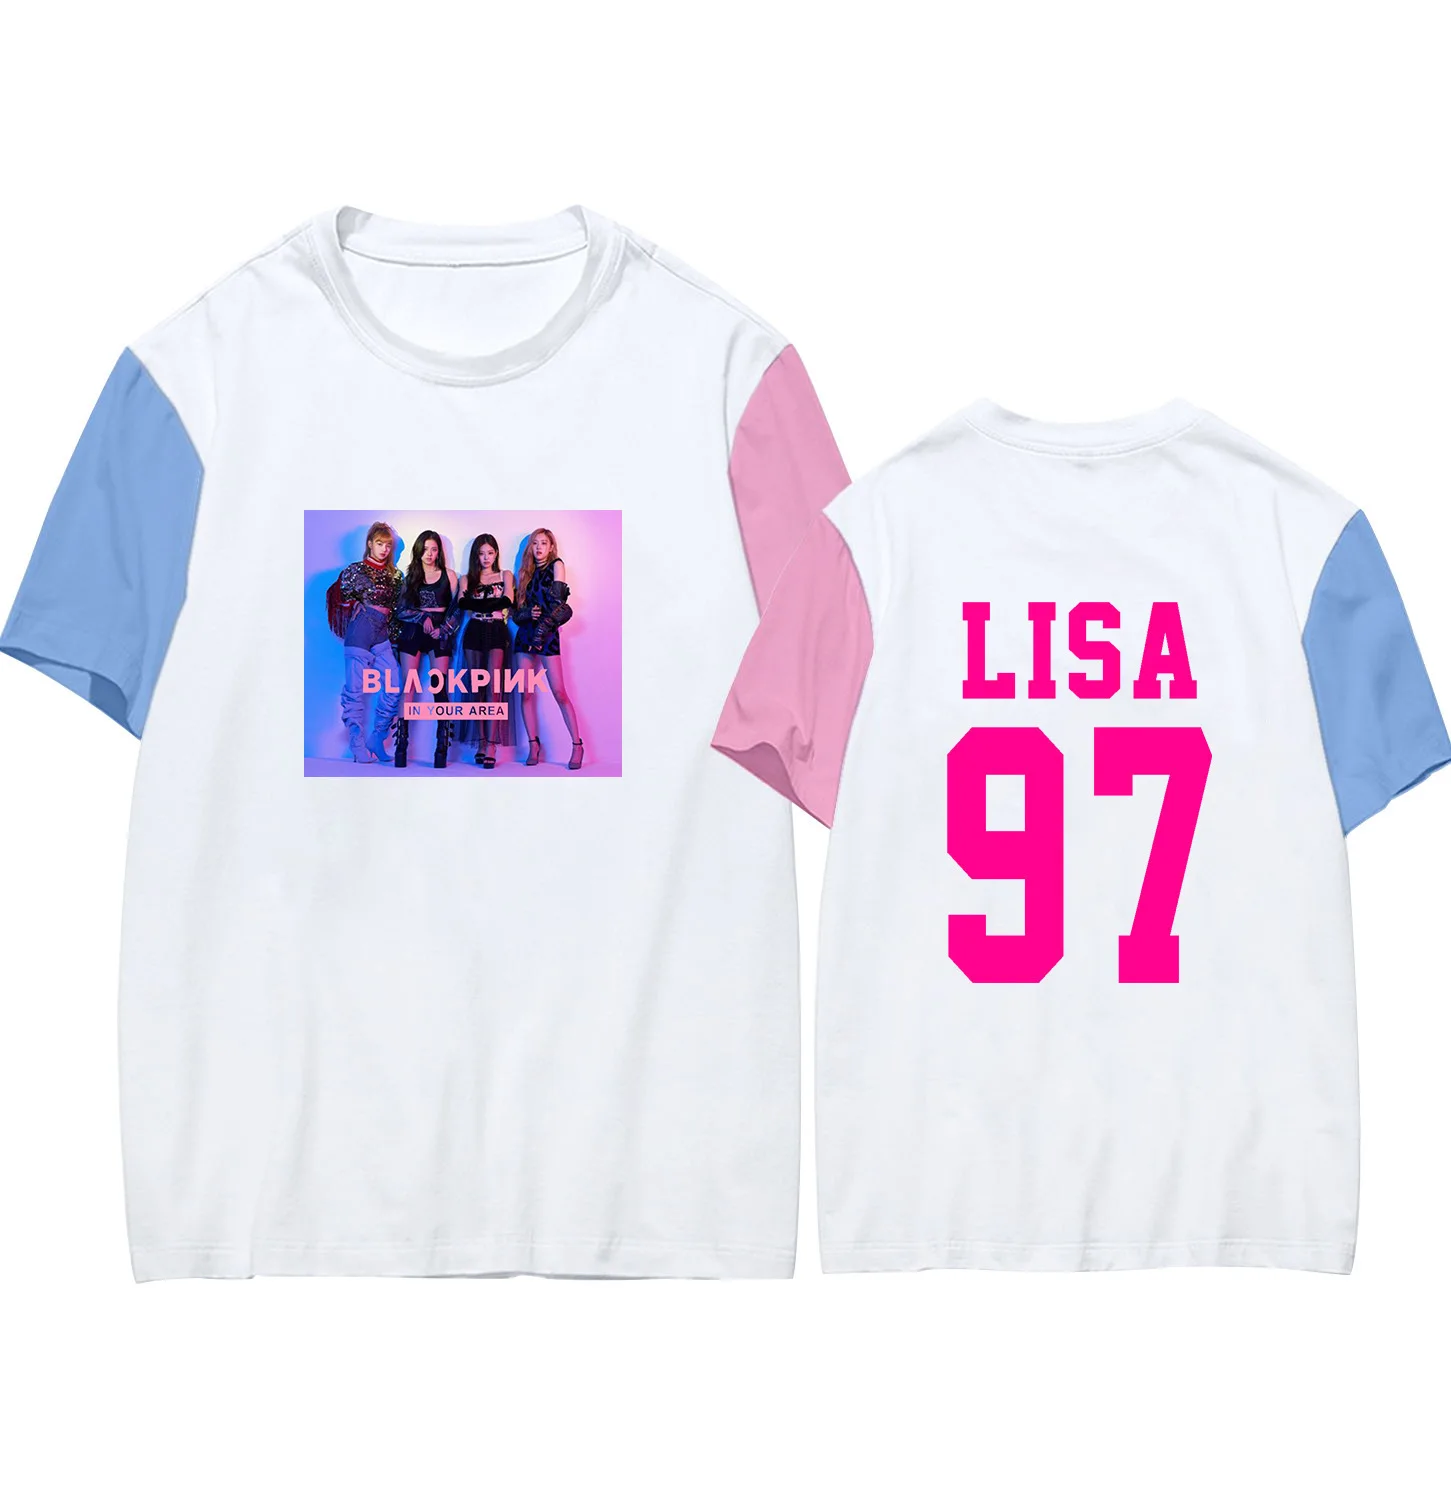 2020 Fashion Kpop Blackpink Concert T Shirt  In Your Area Kill This Love Tshirt Lisa Rose T Shirt Women Casual Top New